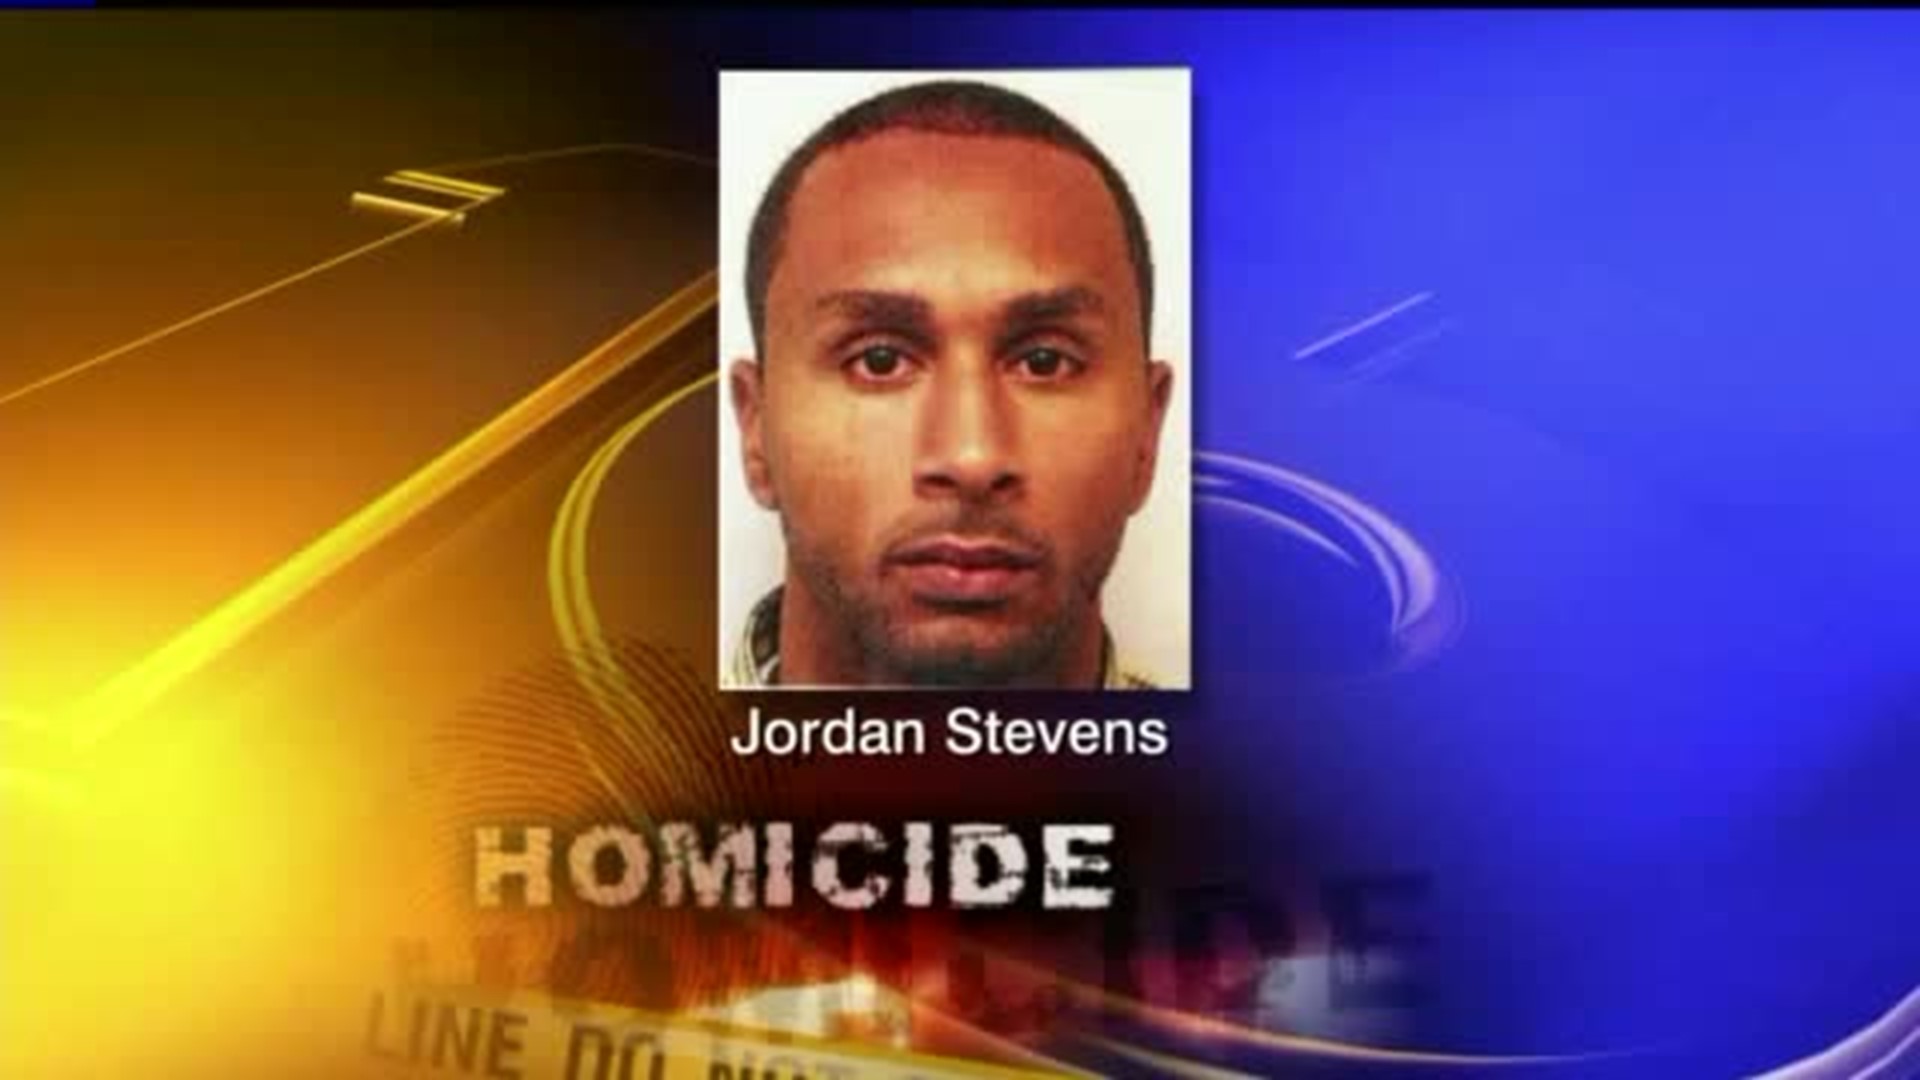 Man Charged in Wilkes-Barre Homicide